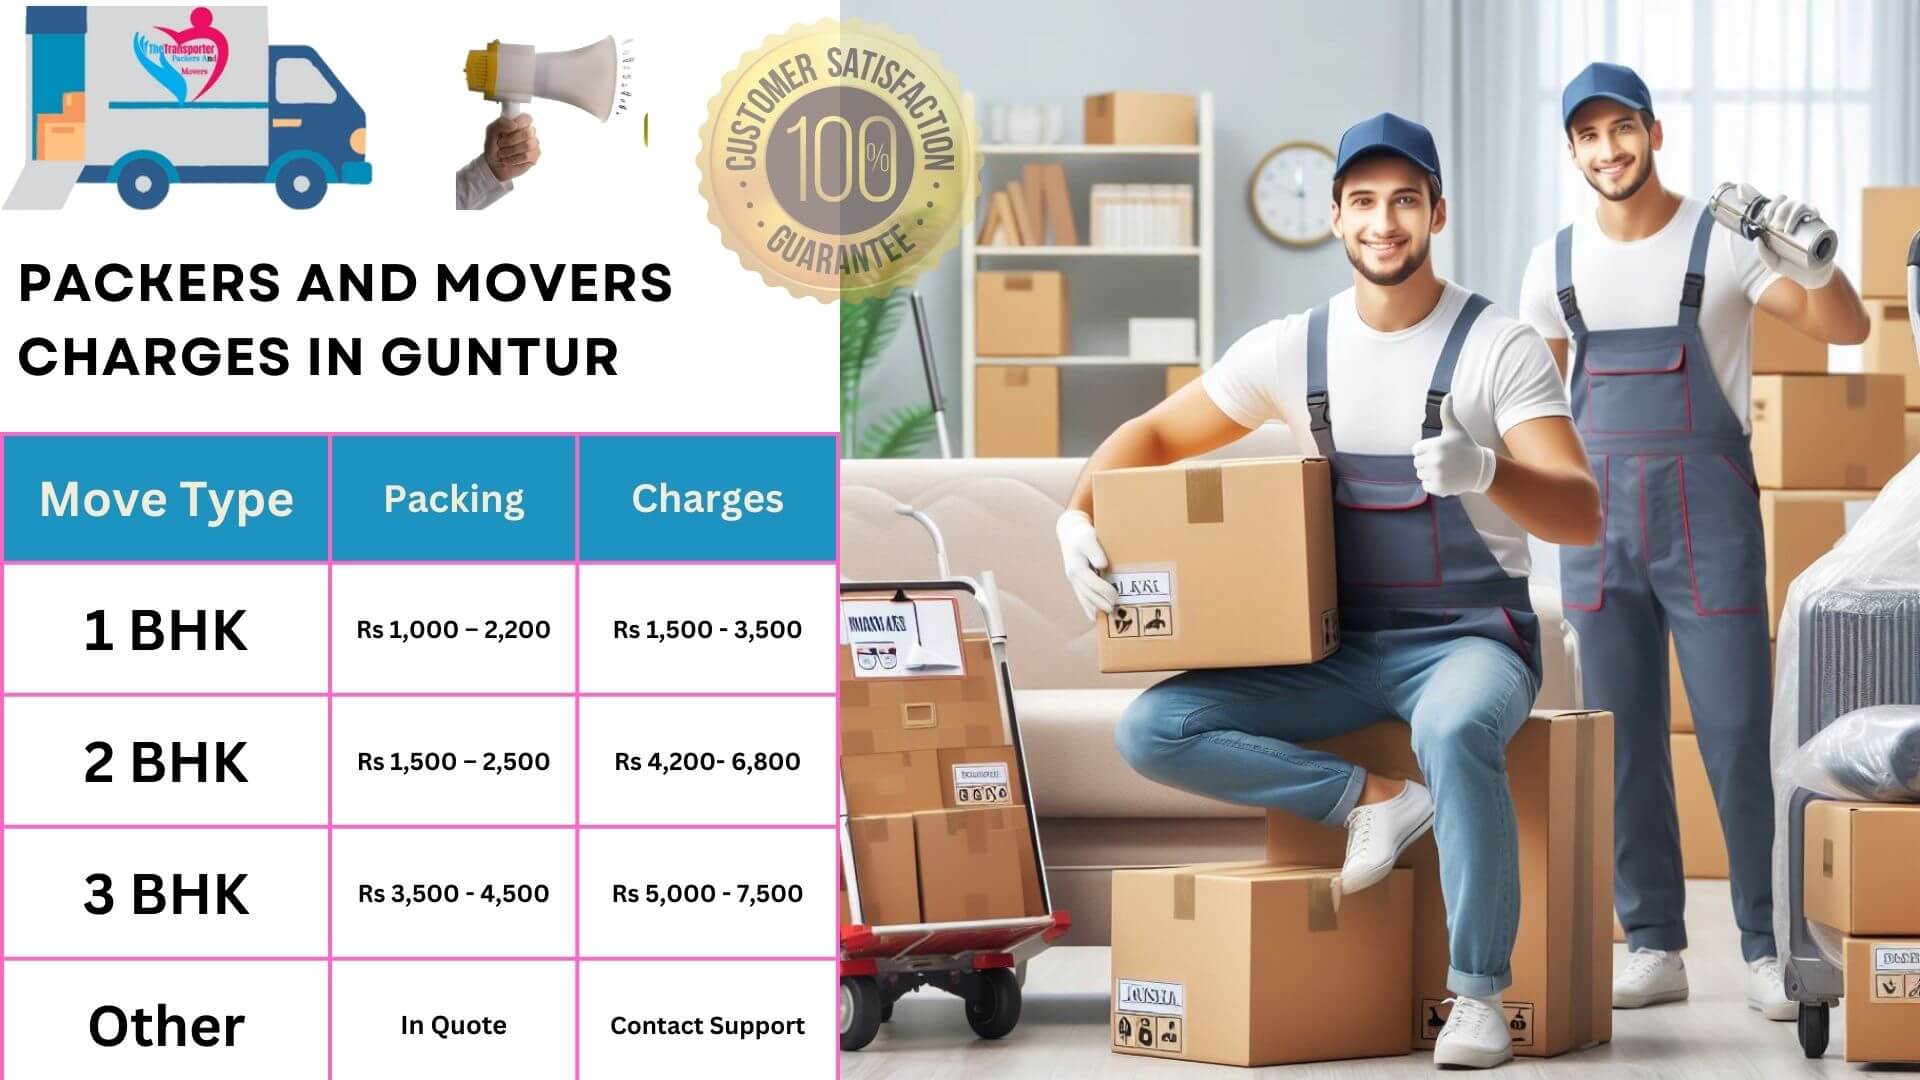 TheTransporter Packers and movers Charges list in Guntur 